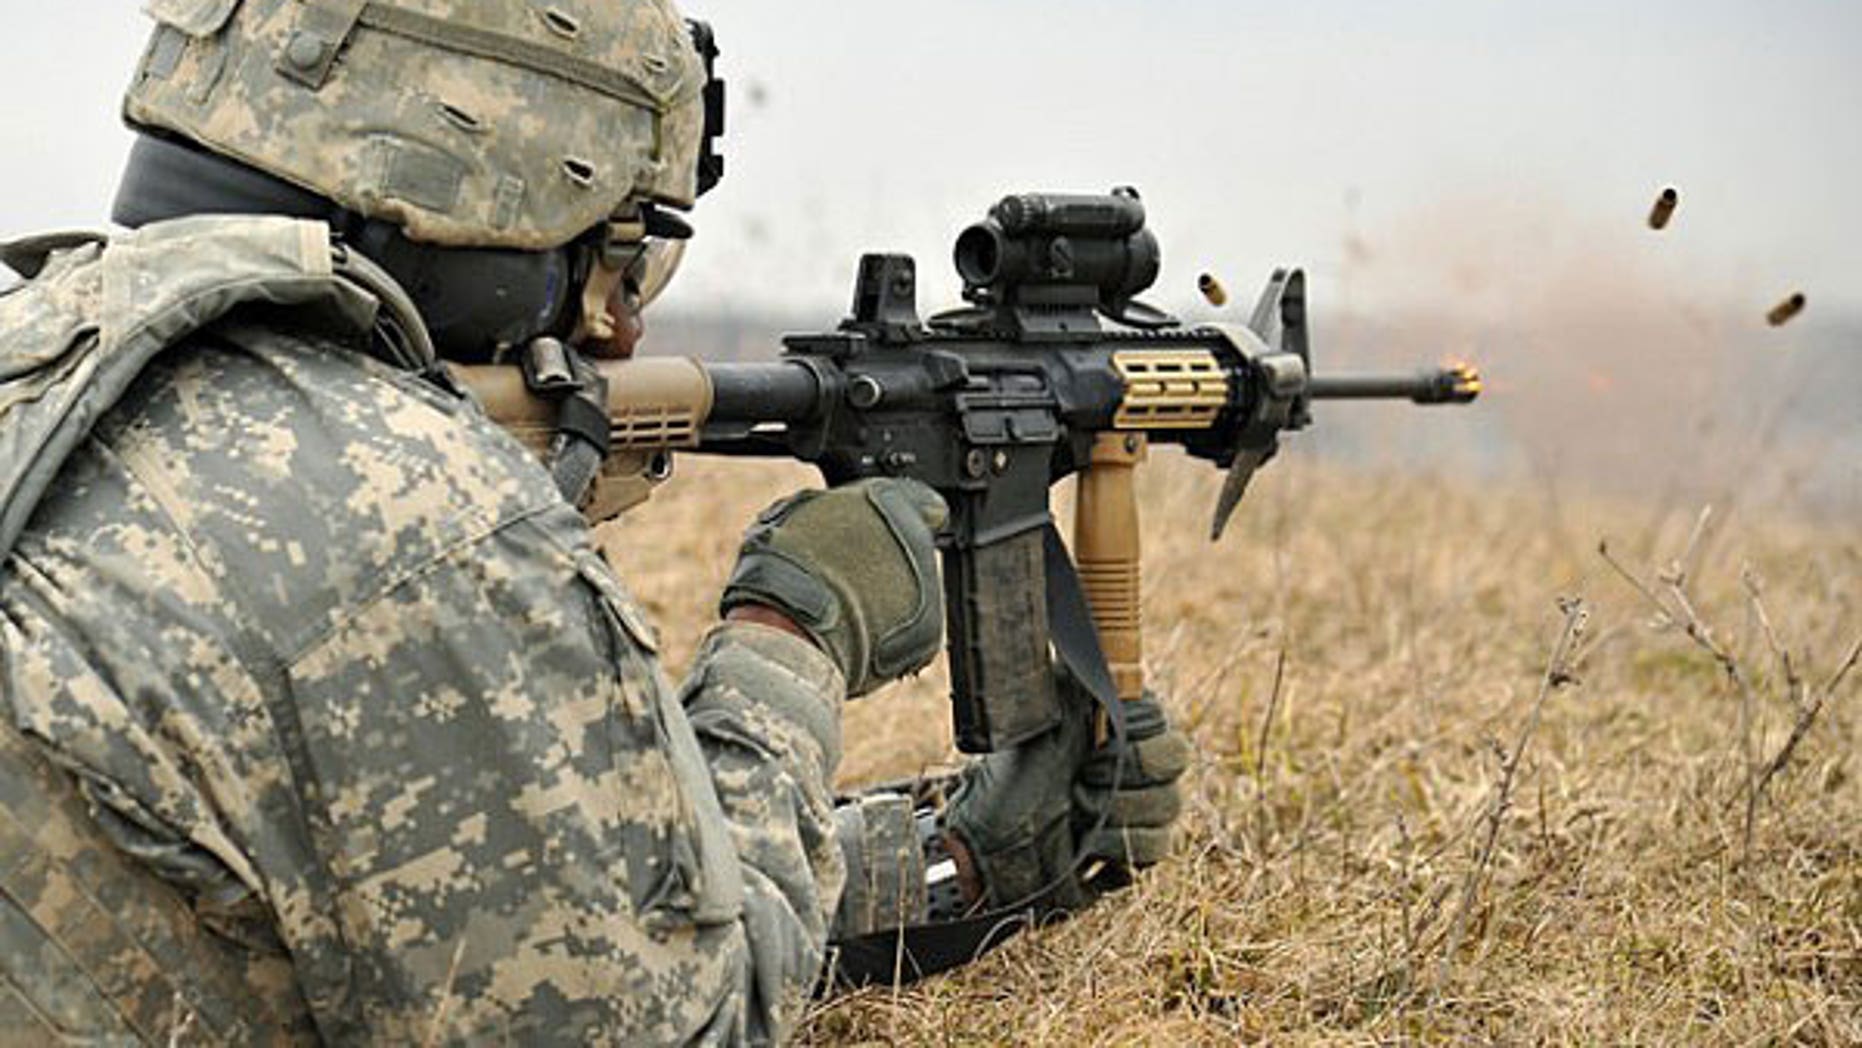 Army Wants Upgrades to Improve M4A1 Carbine's Performance, Accuracy ...